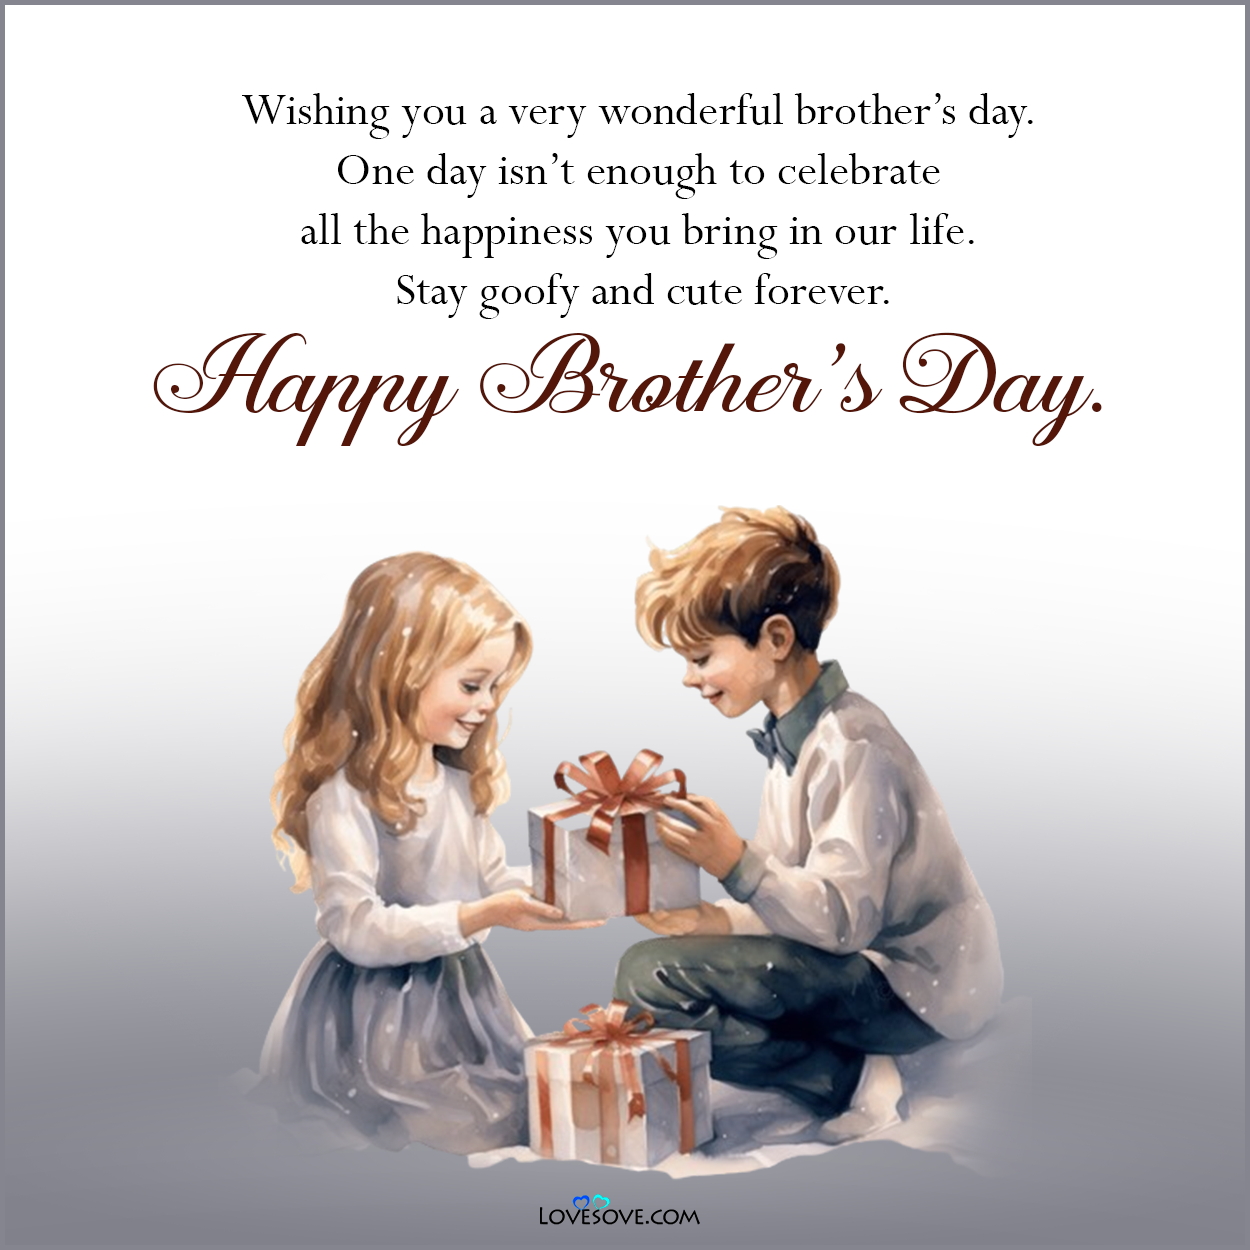 national brothers day quotes, brothers day quotes short